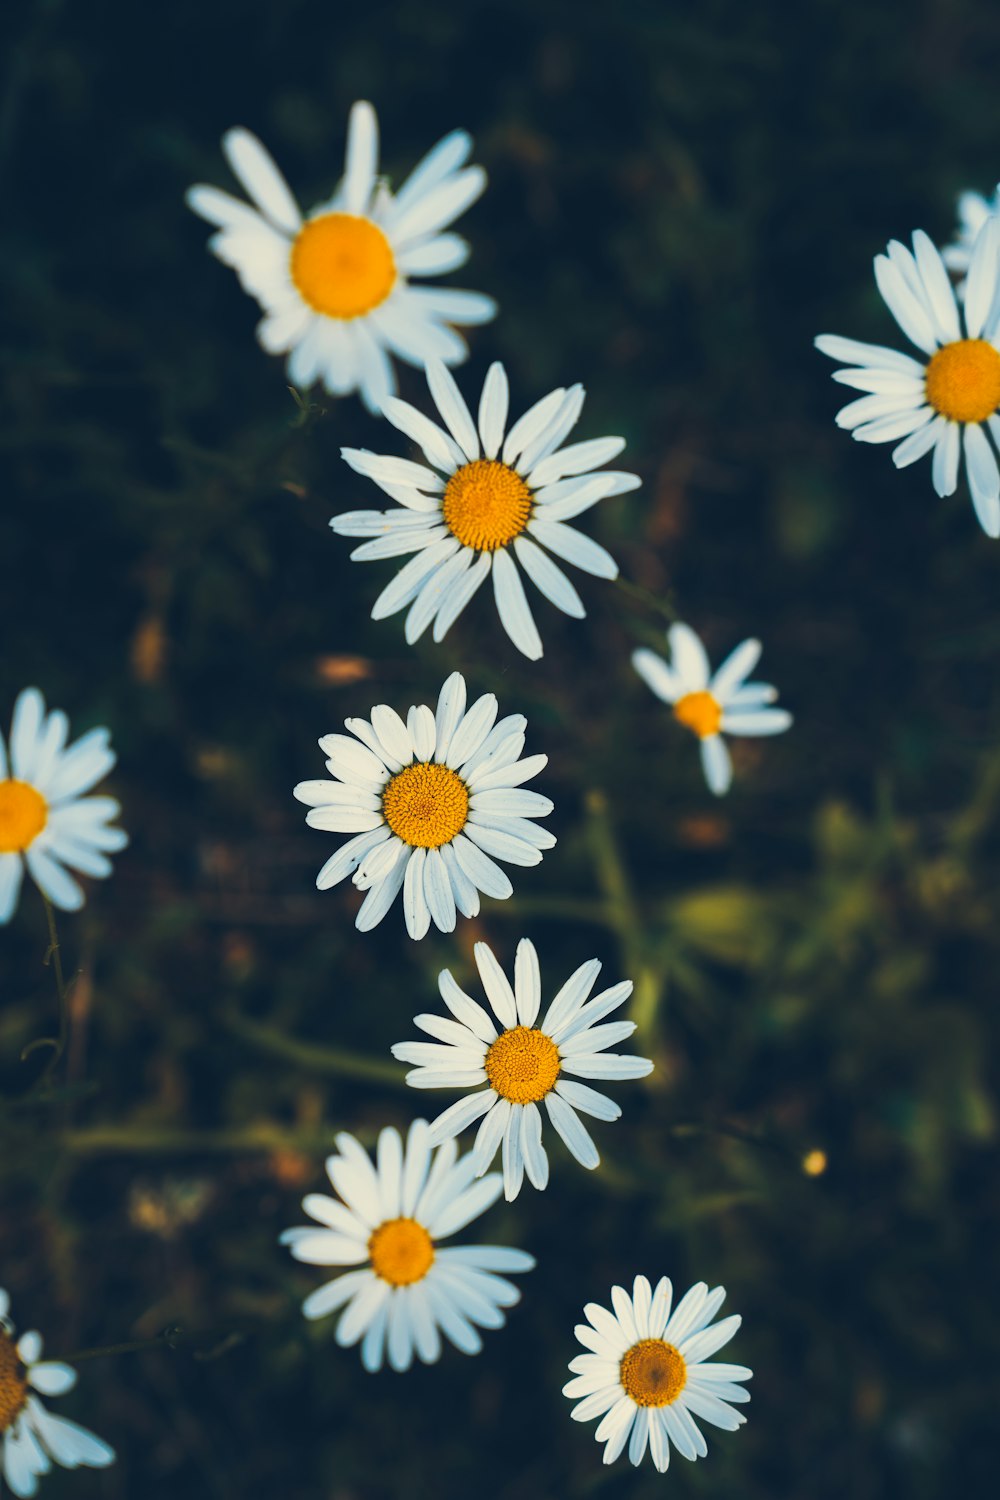 a bunch of white daisies with yellow centers